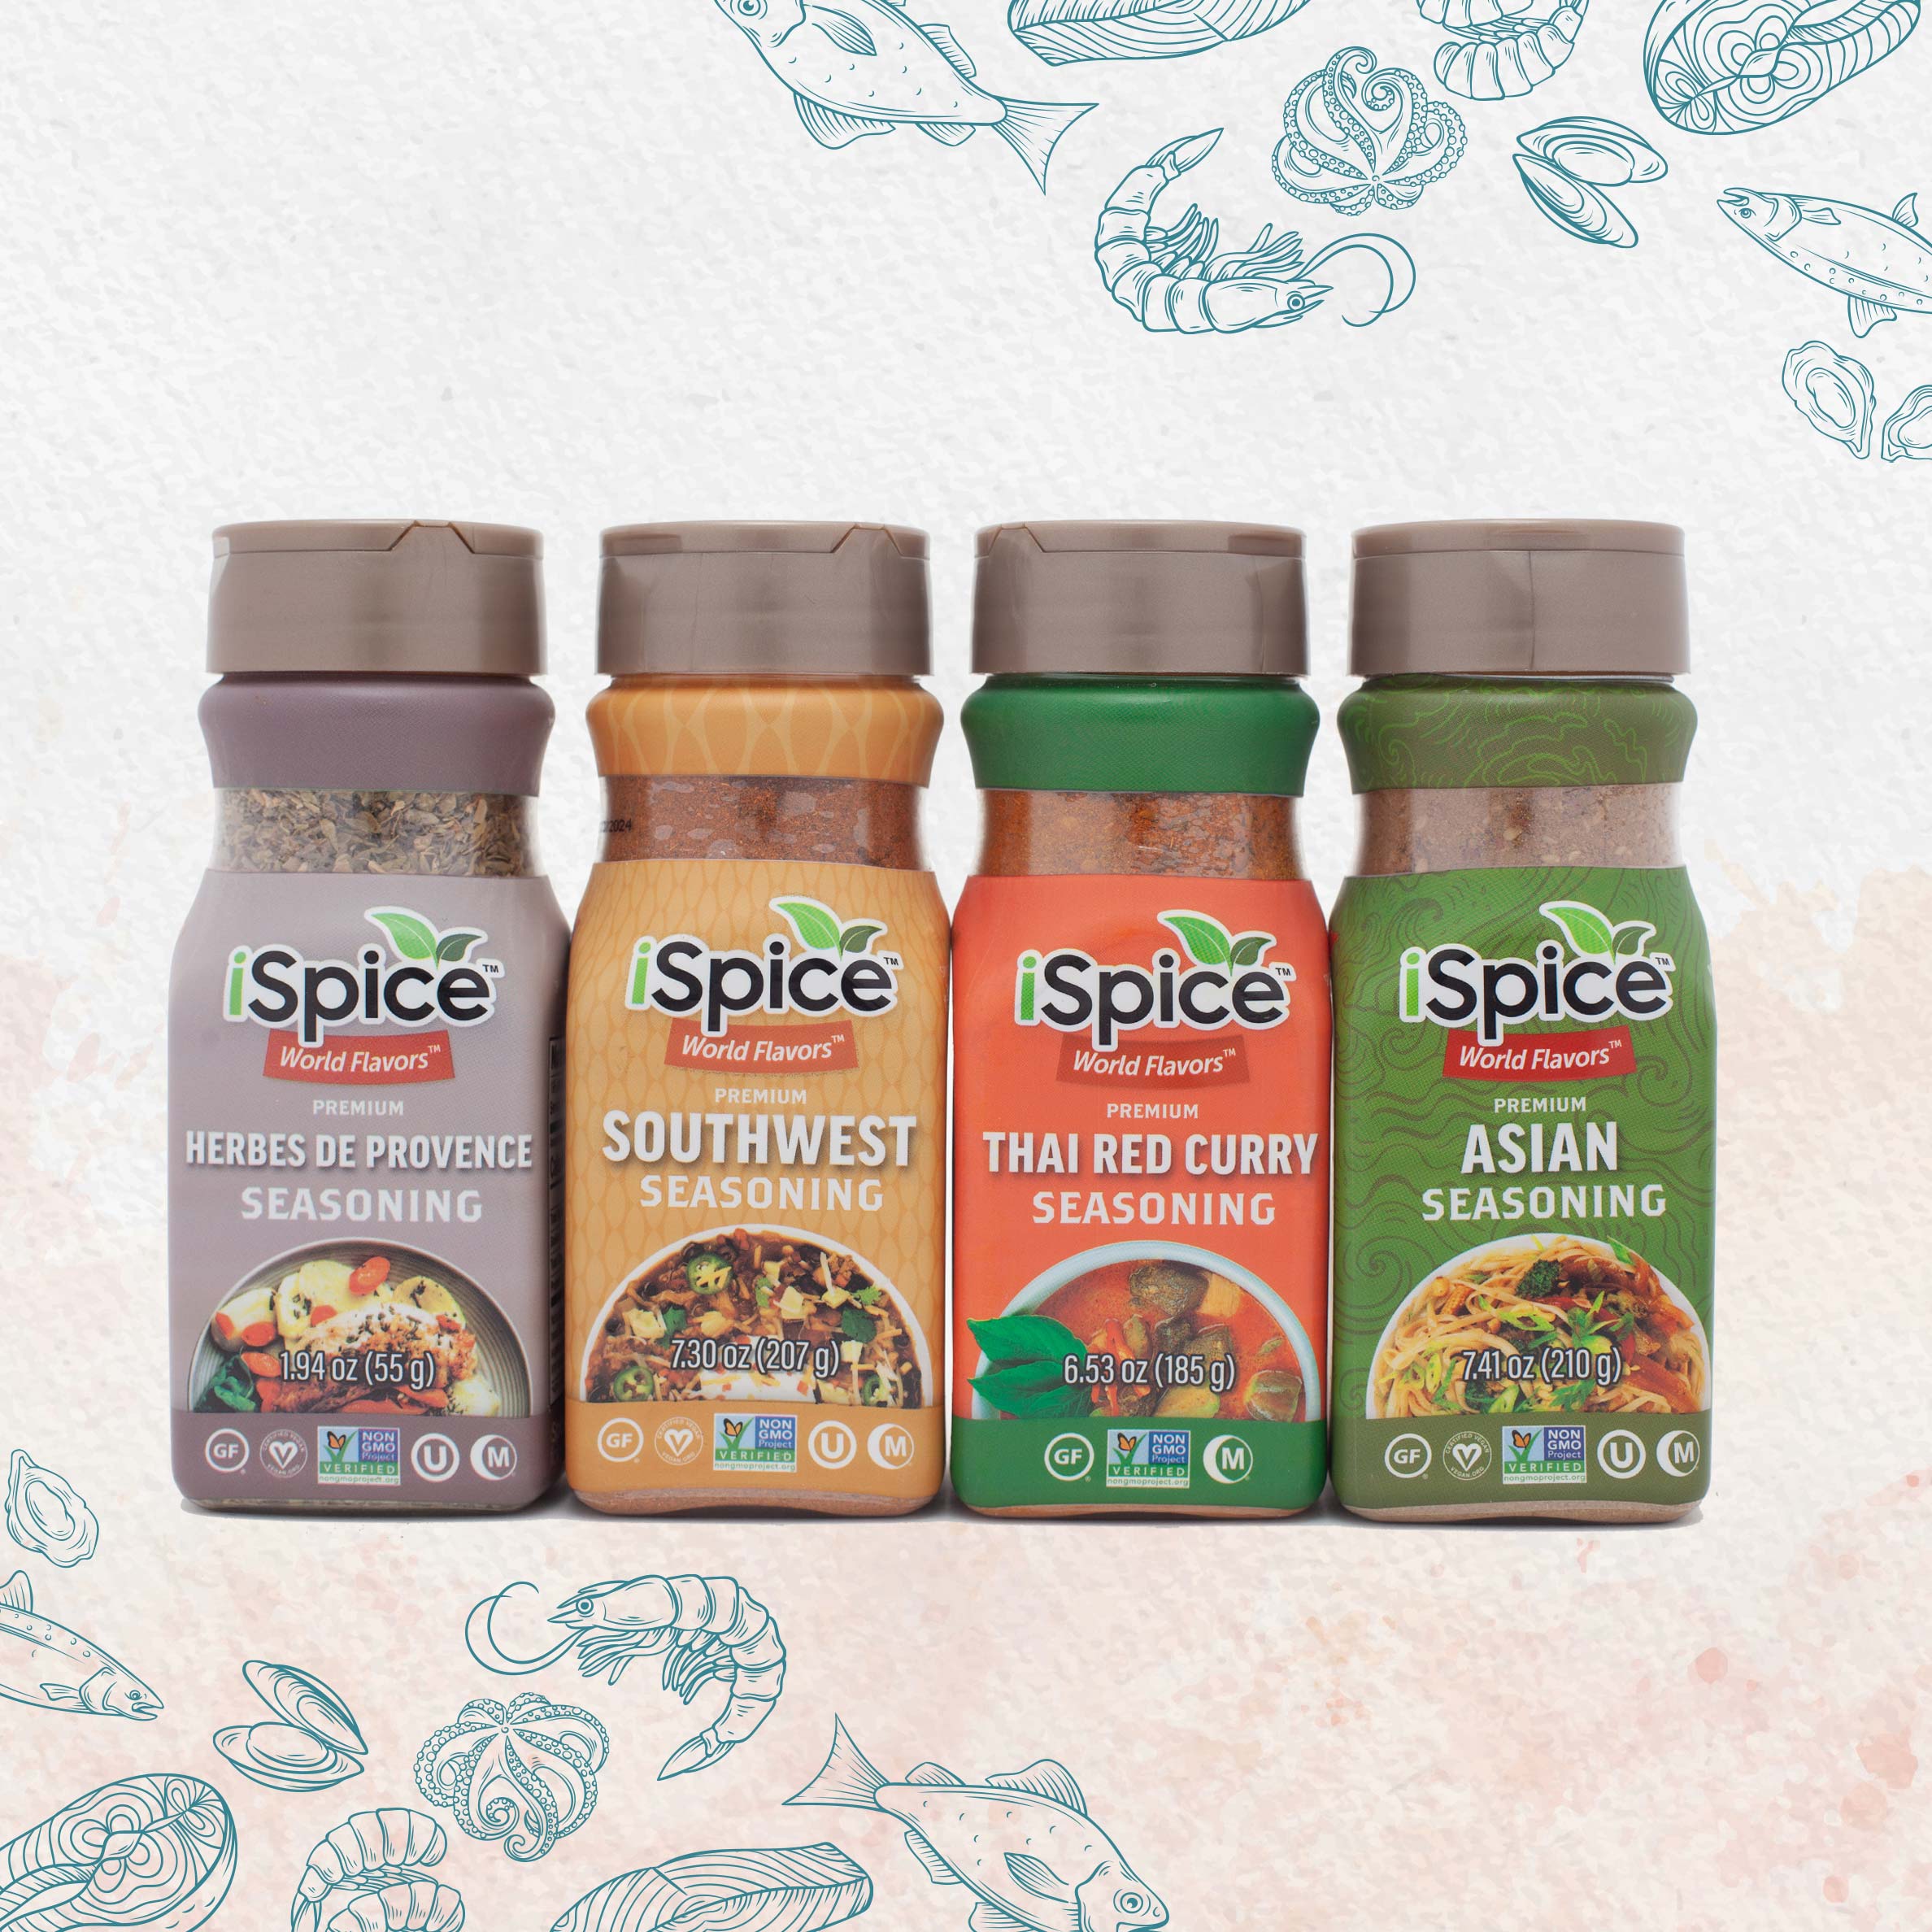 iSpice, 7 Pack of Spice and Herbs, Savory, Mixed Spices Seasonings Gift  Set